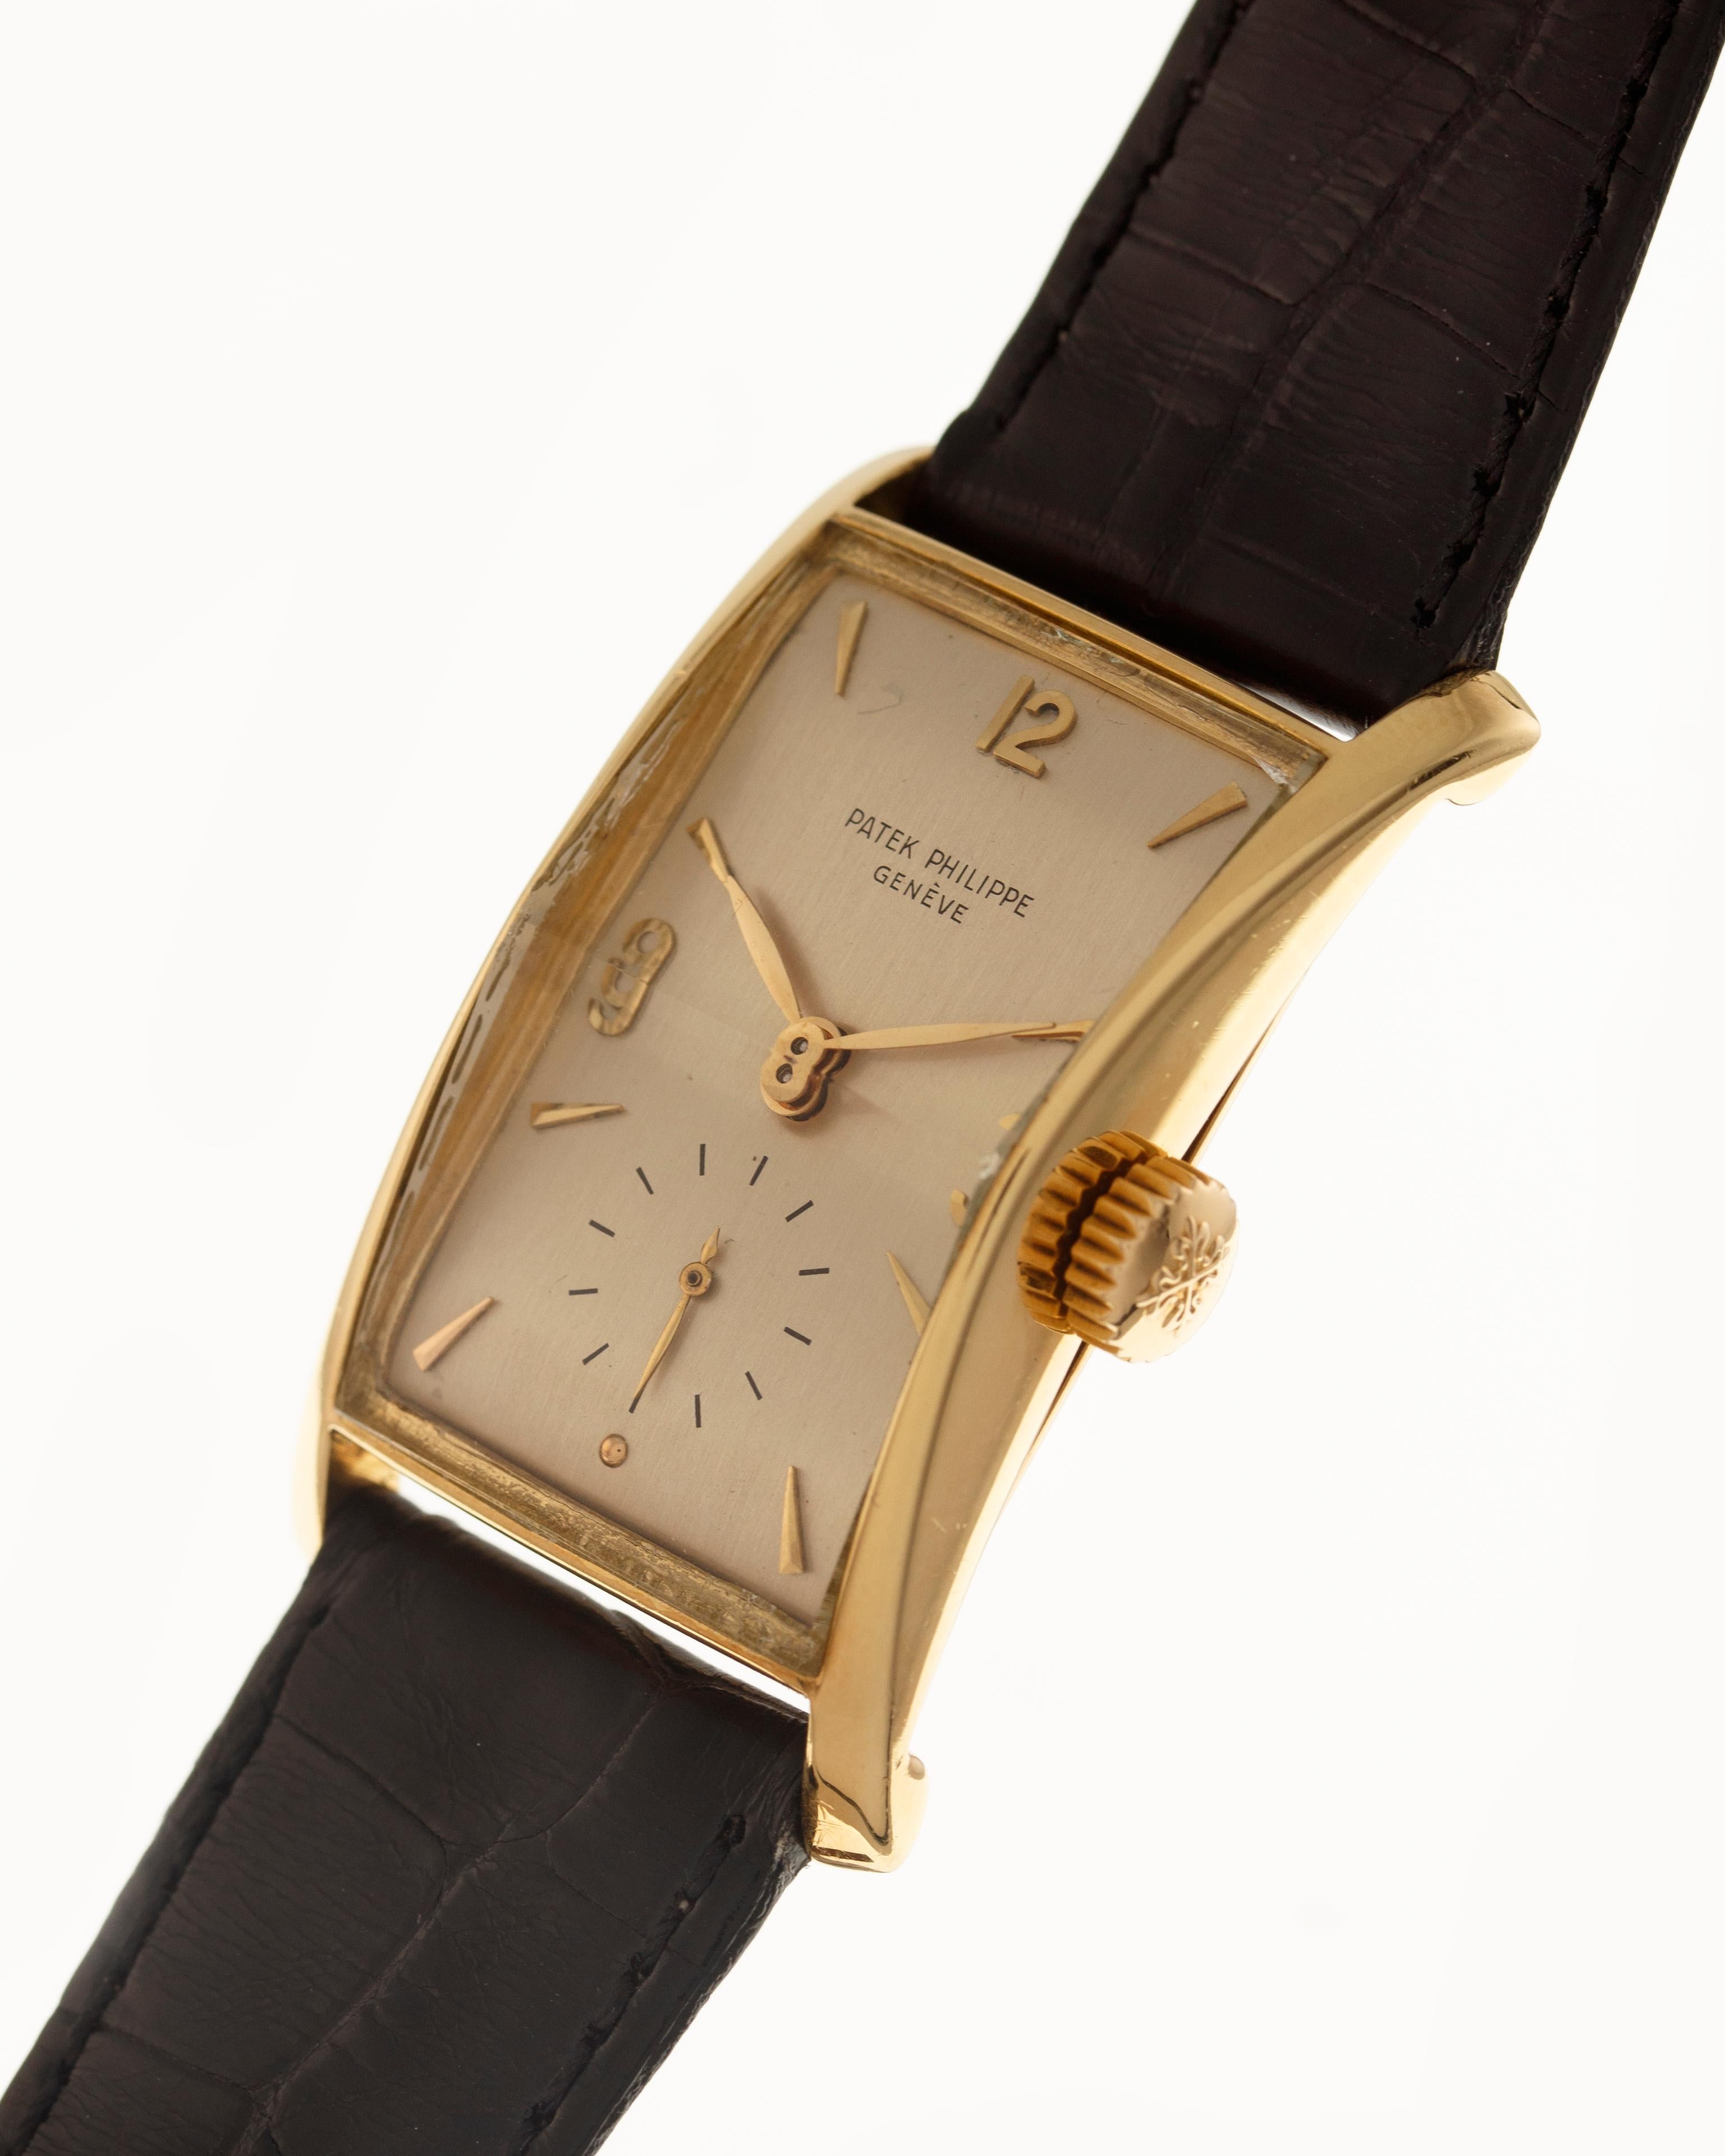 Case: rectangular shape in 18 kt yellow gold in two parts with concave sides, 41 mm. overall length, snap on back and faceted crystal-glass

Dial: silvered with applied gold indexes, subsidiary seconds at  6 ‘o clock

Movement: manual winding cal.